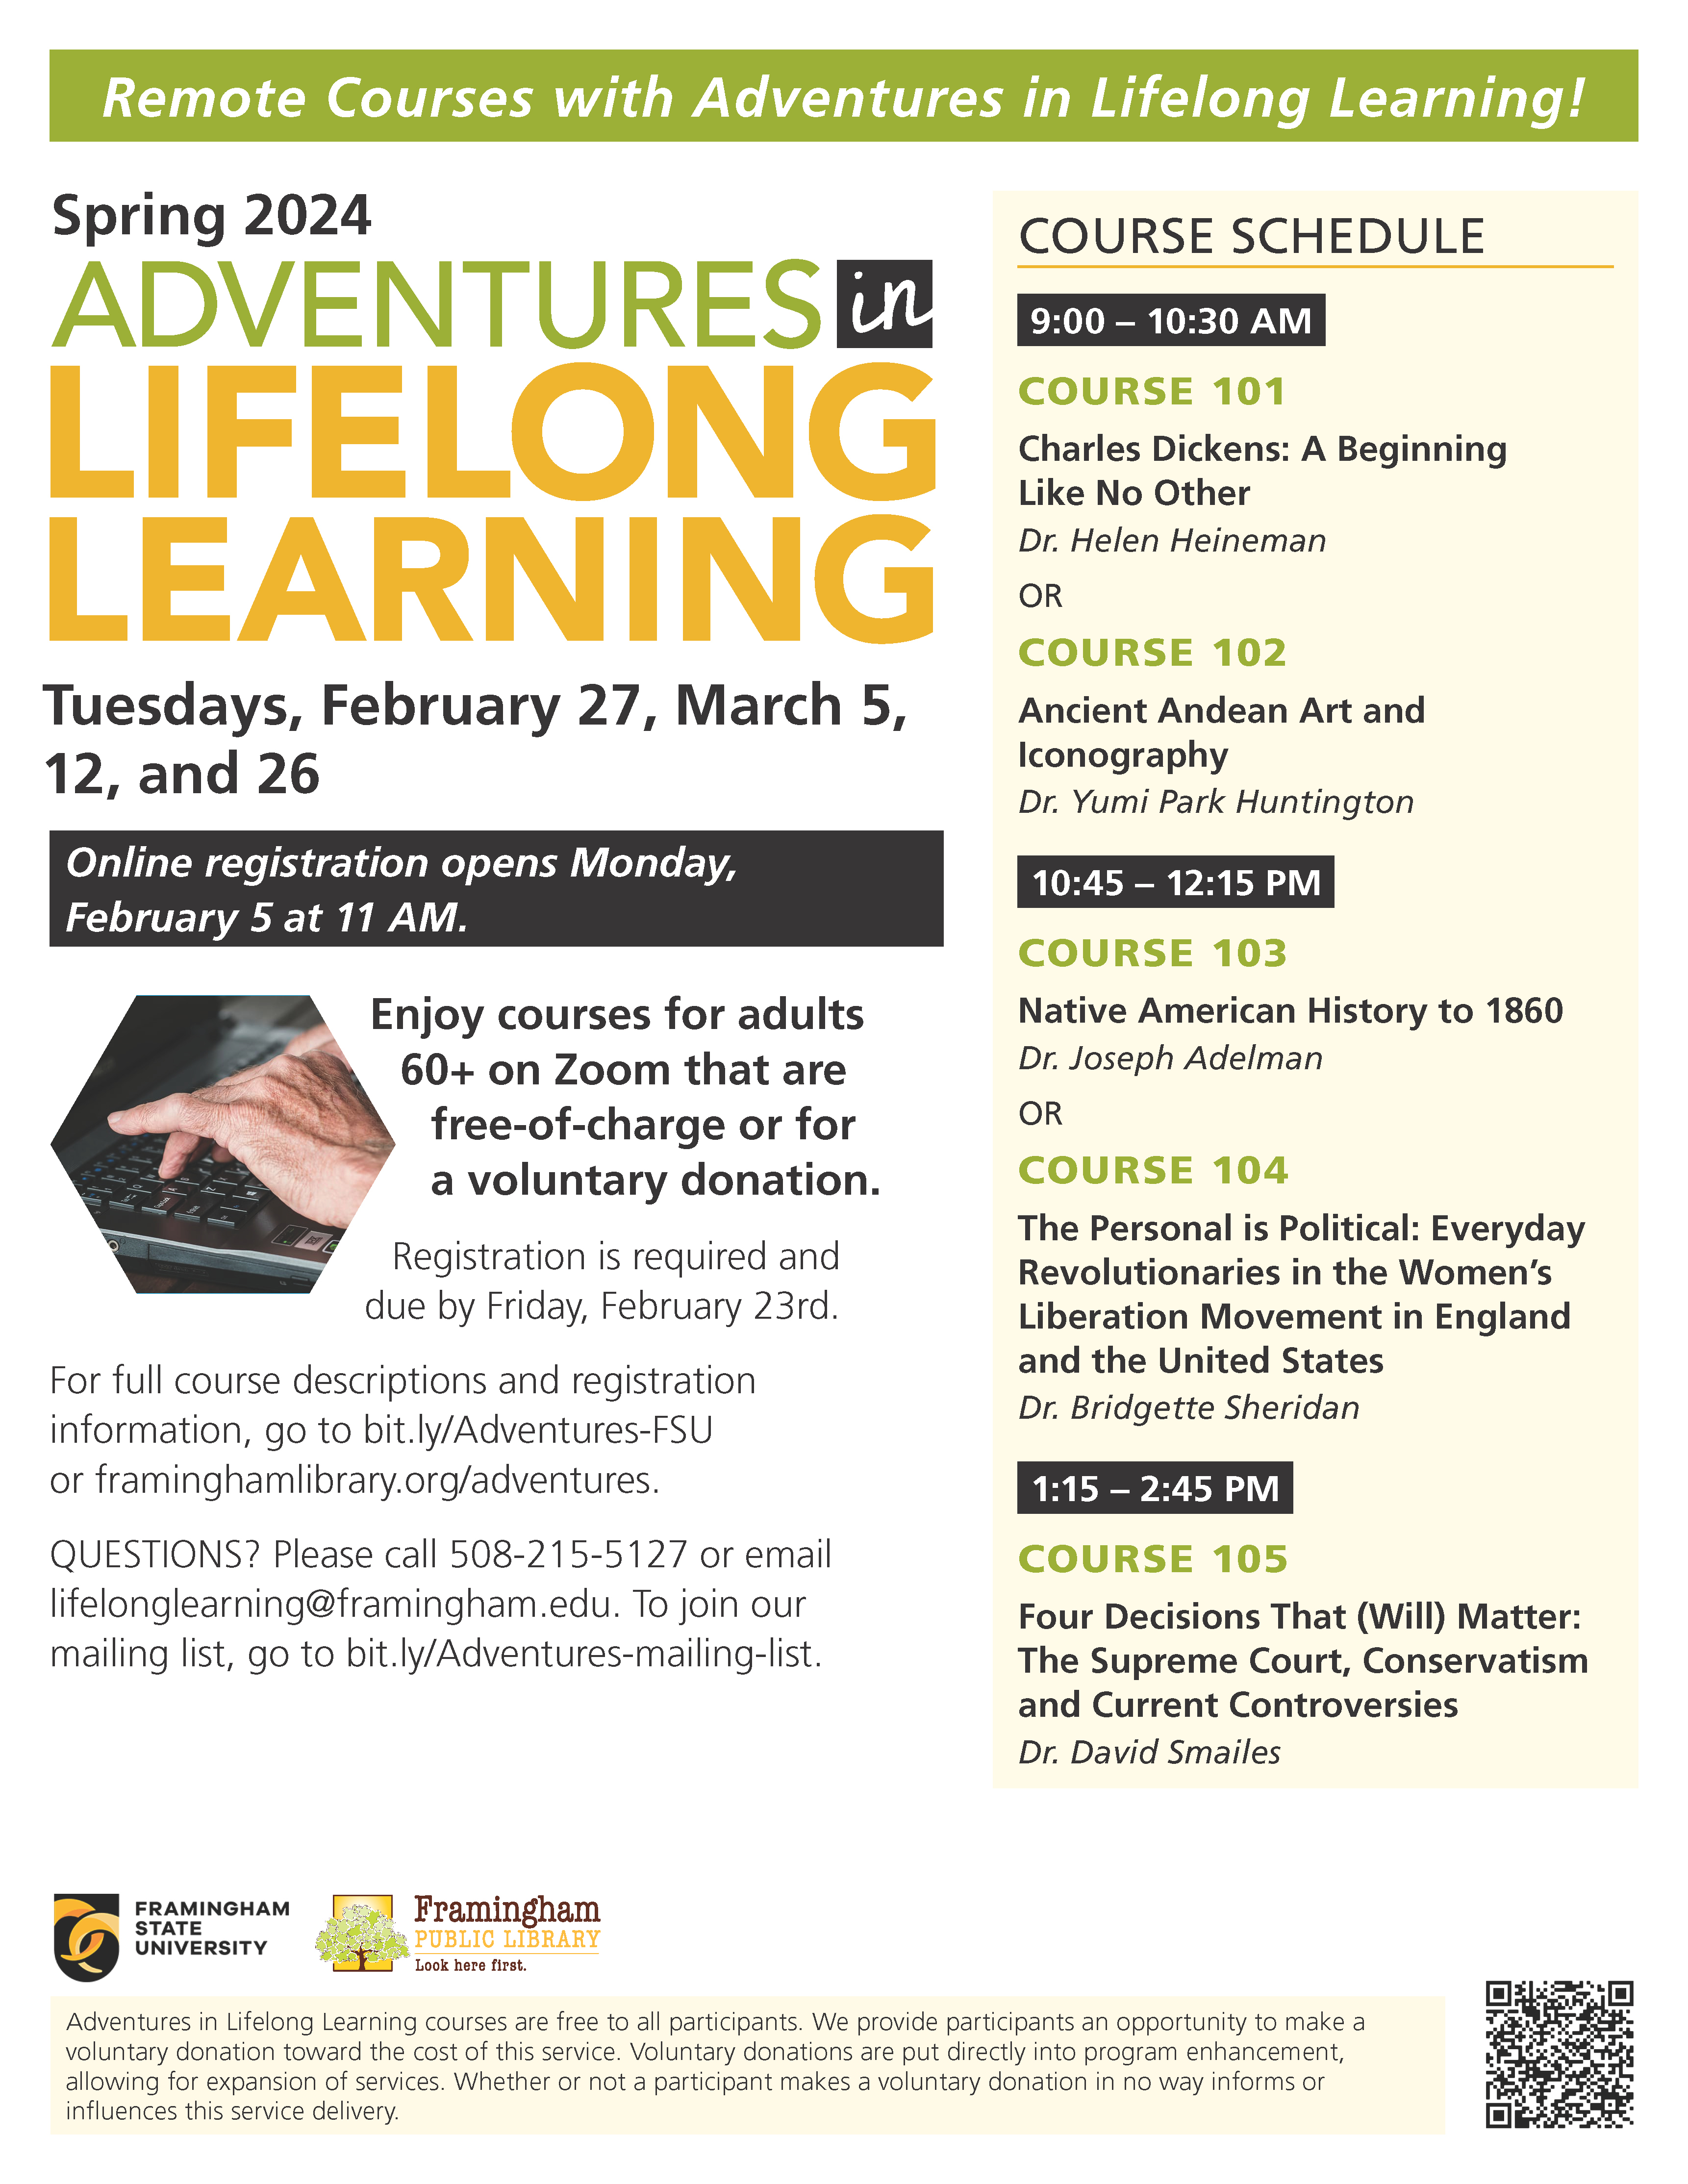 Adventures in Lifelong Learning Spring 2024 Flyer